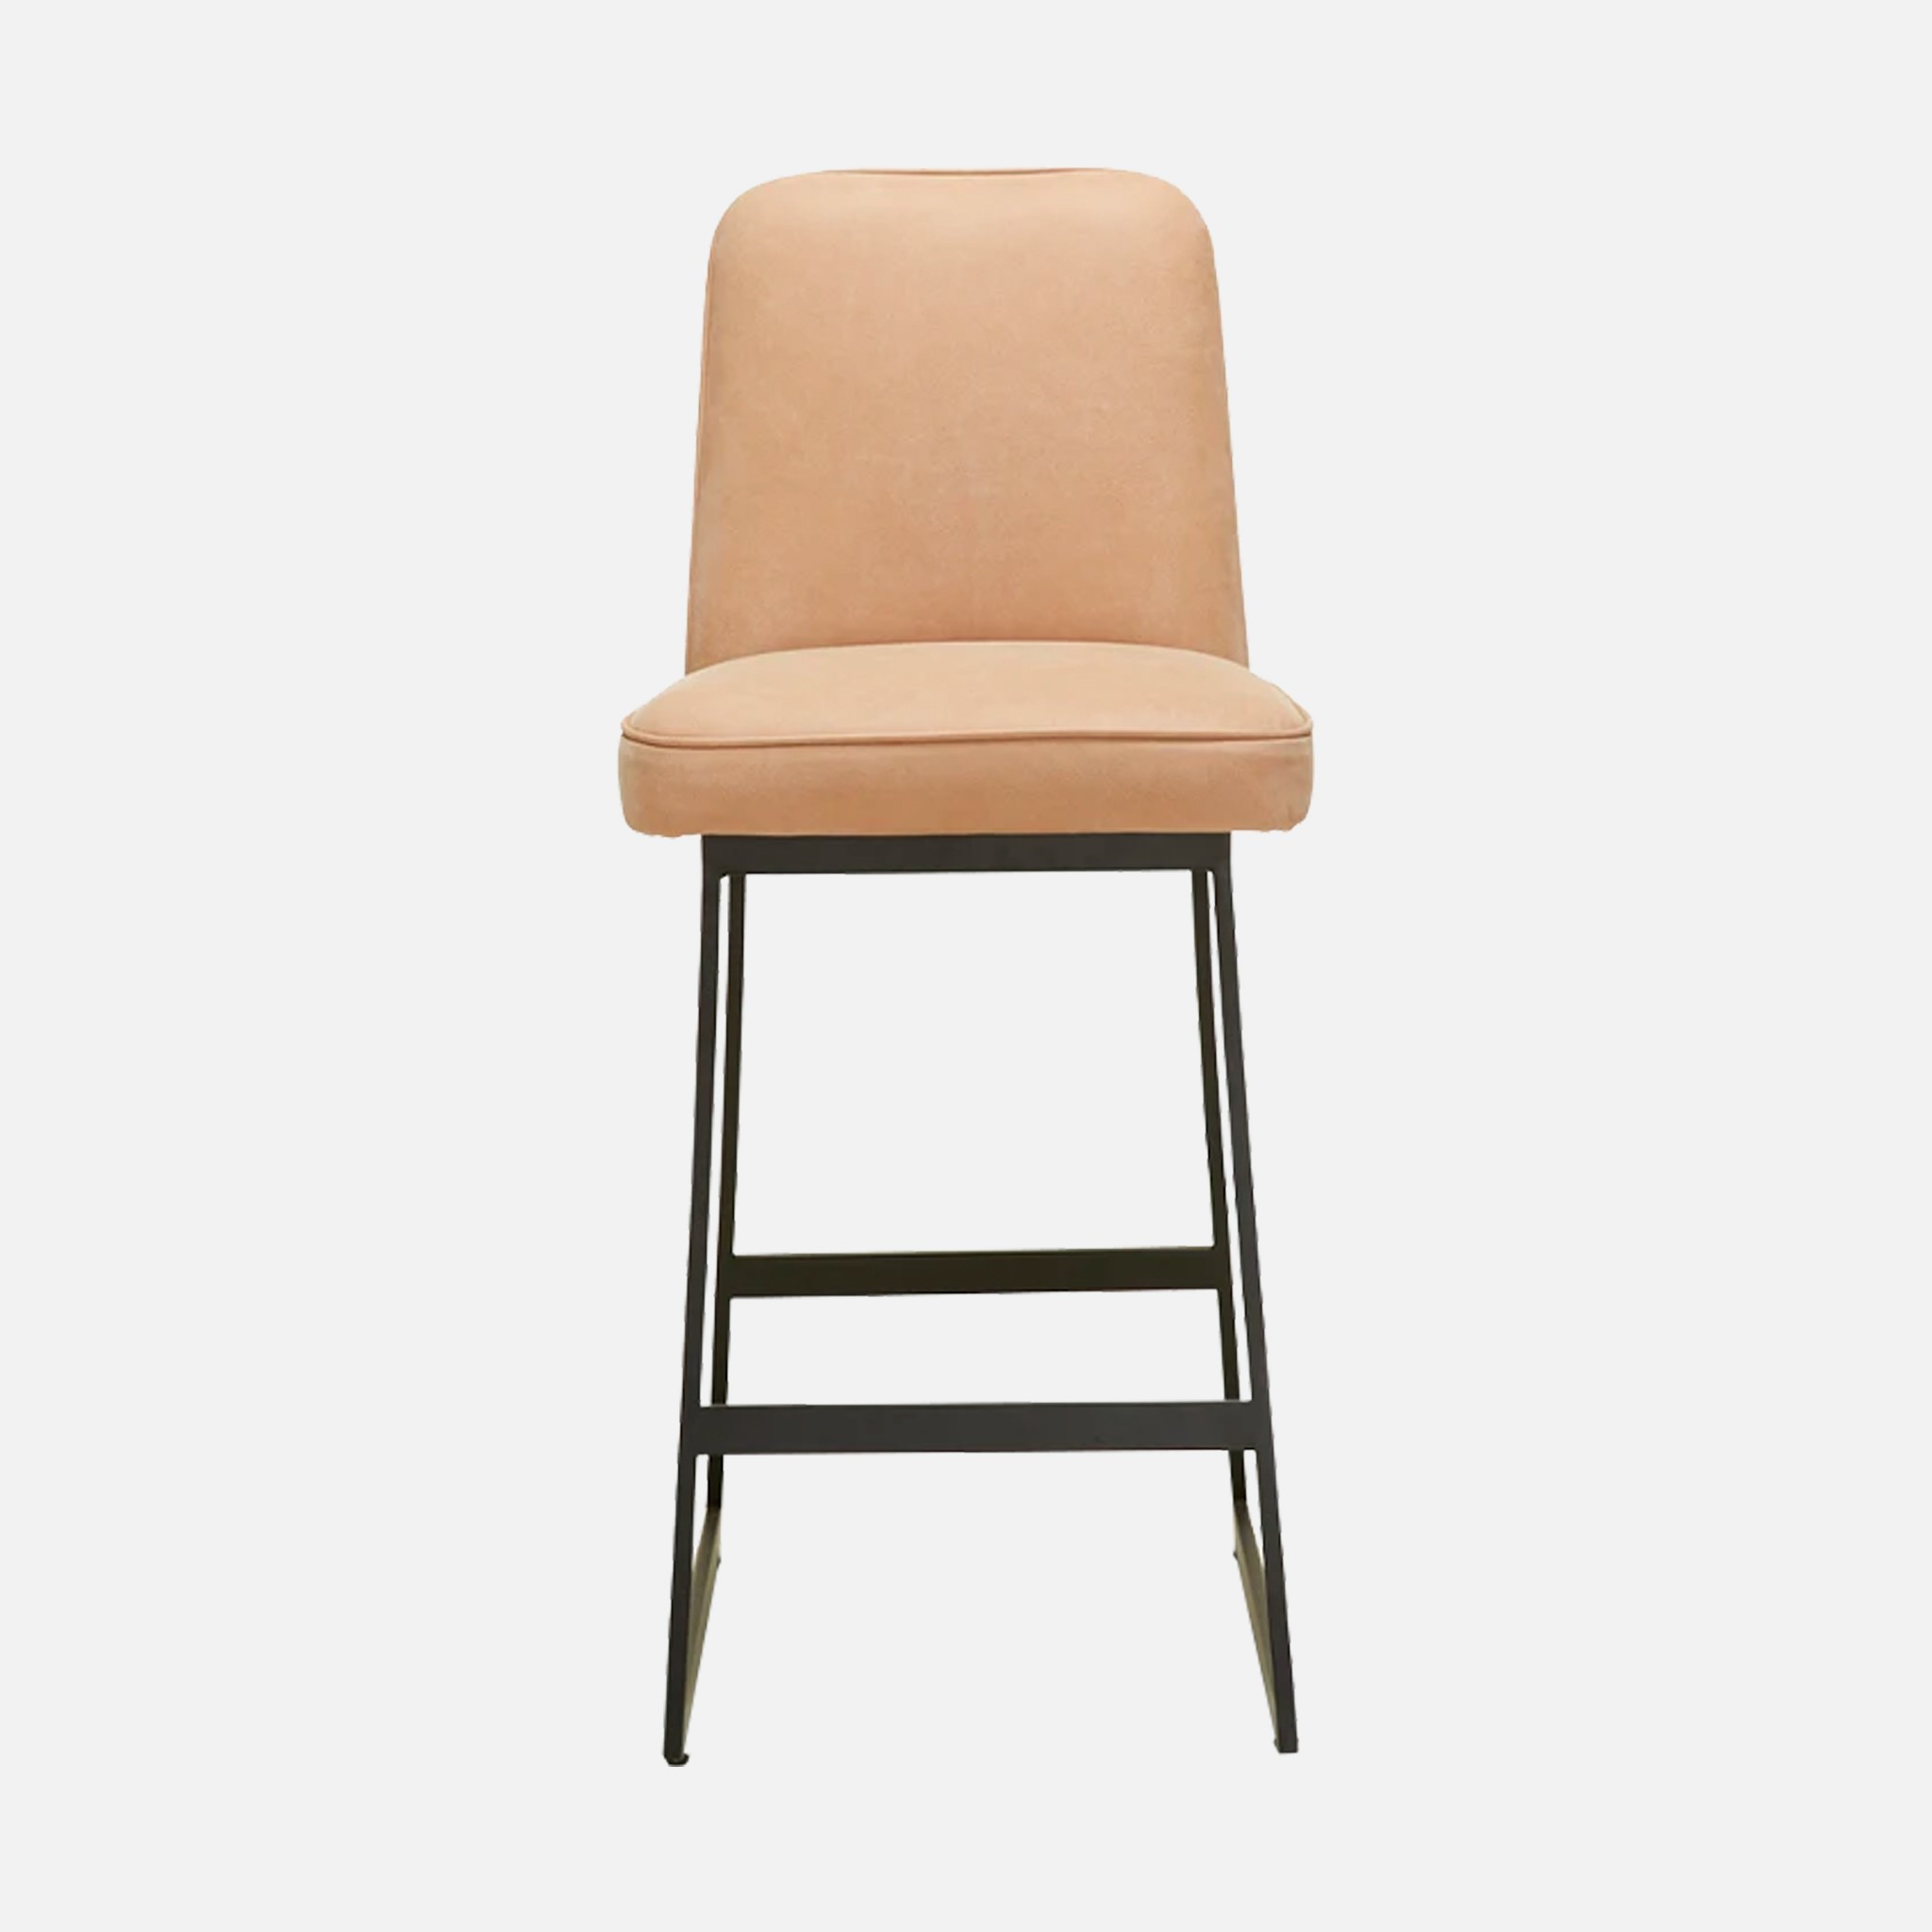 a bar stool with a tan upholstered seat